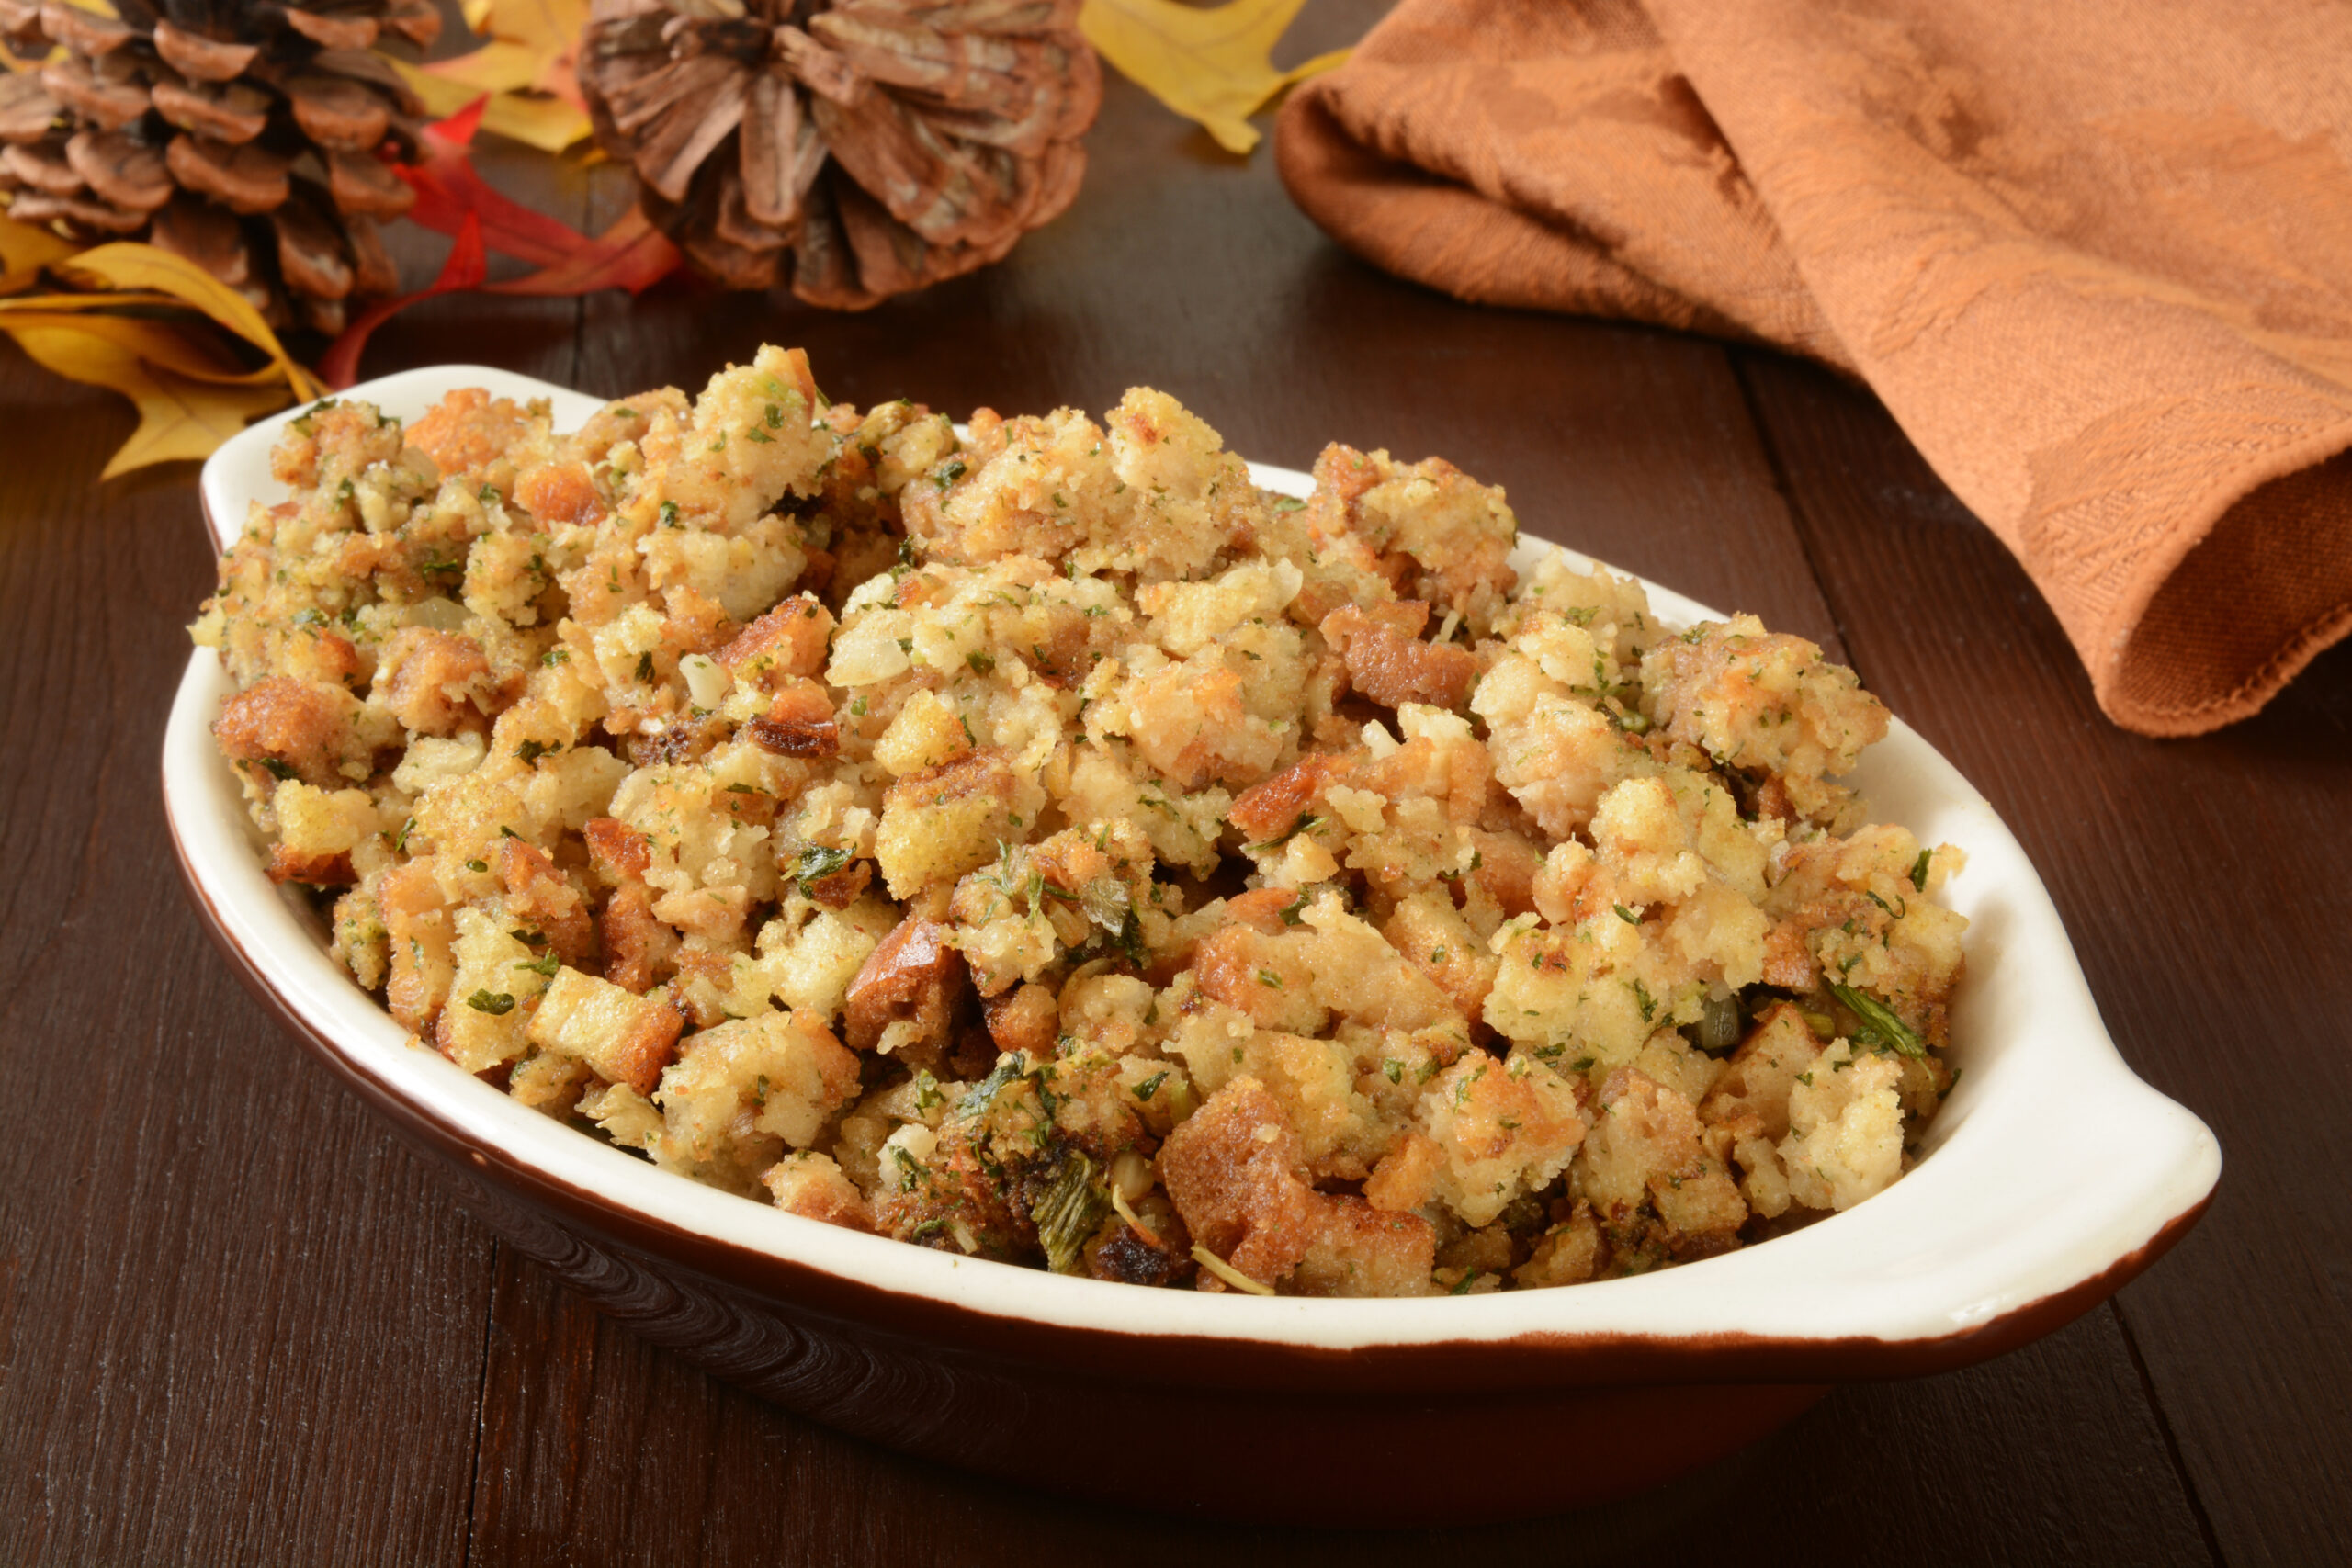 Stuffed with stuffing... well, you get the point.